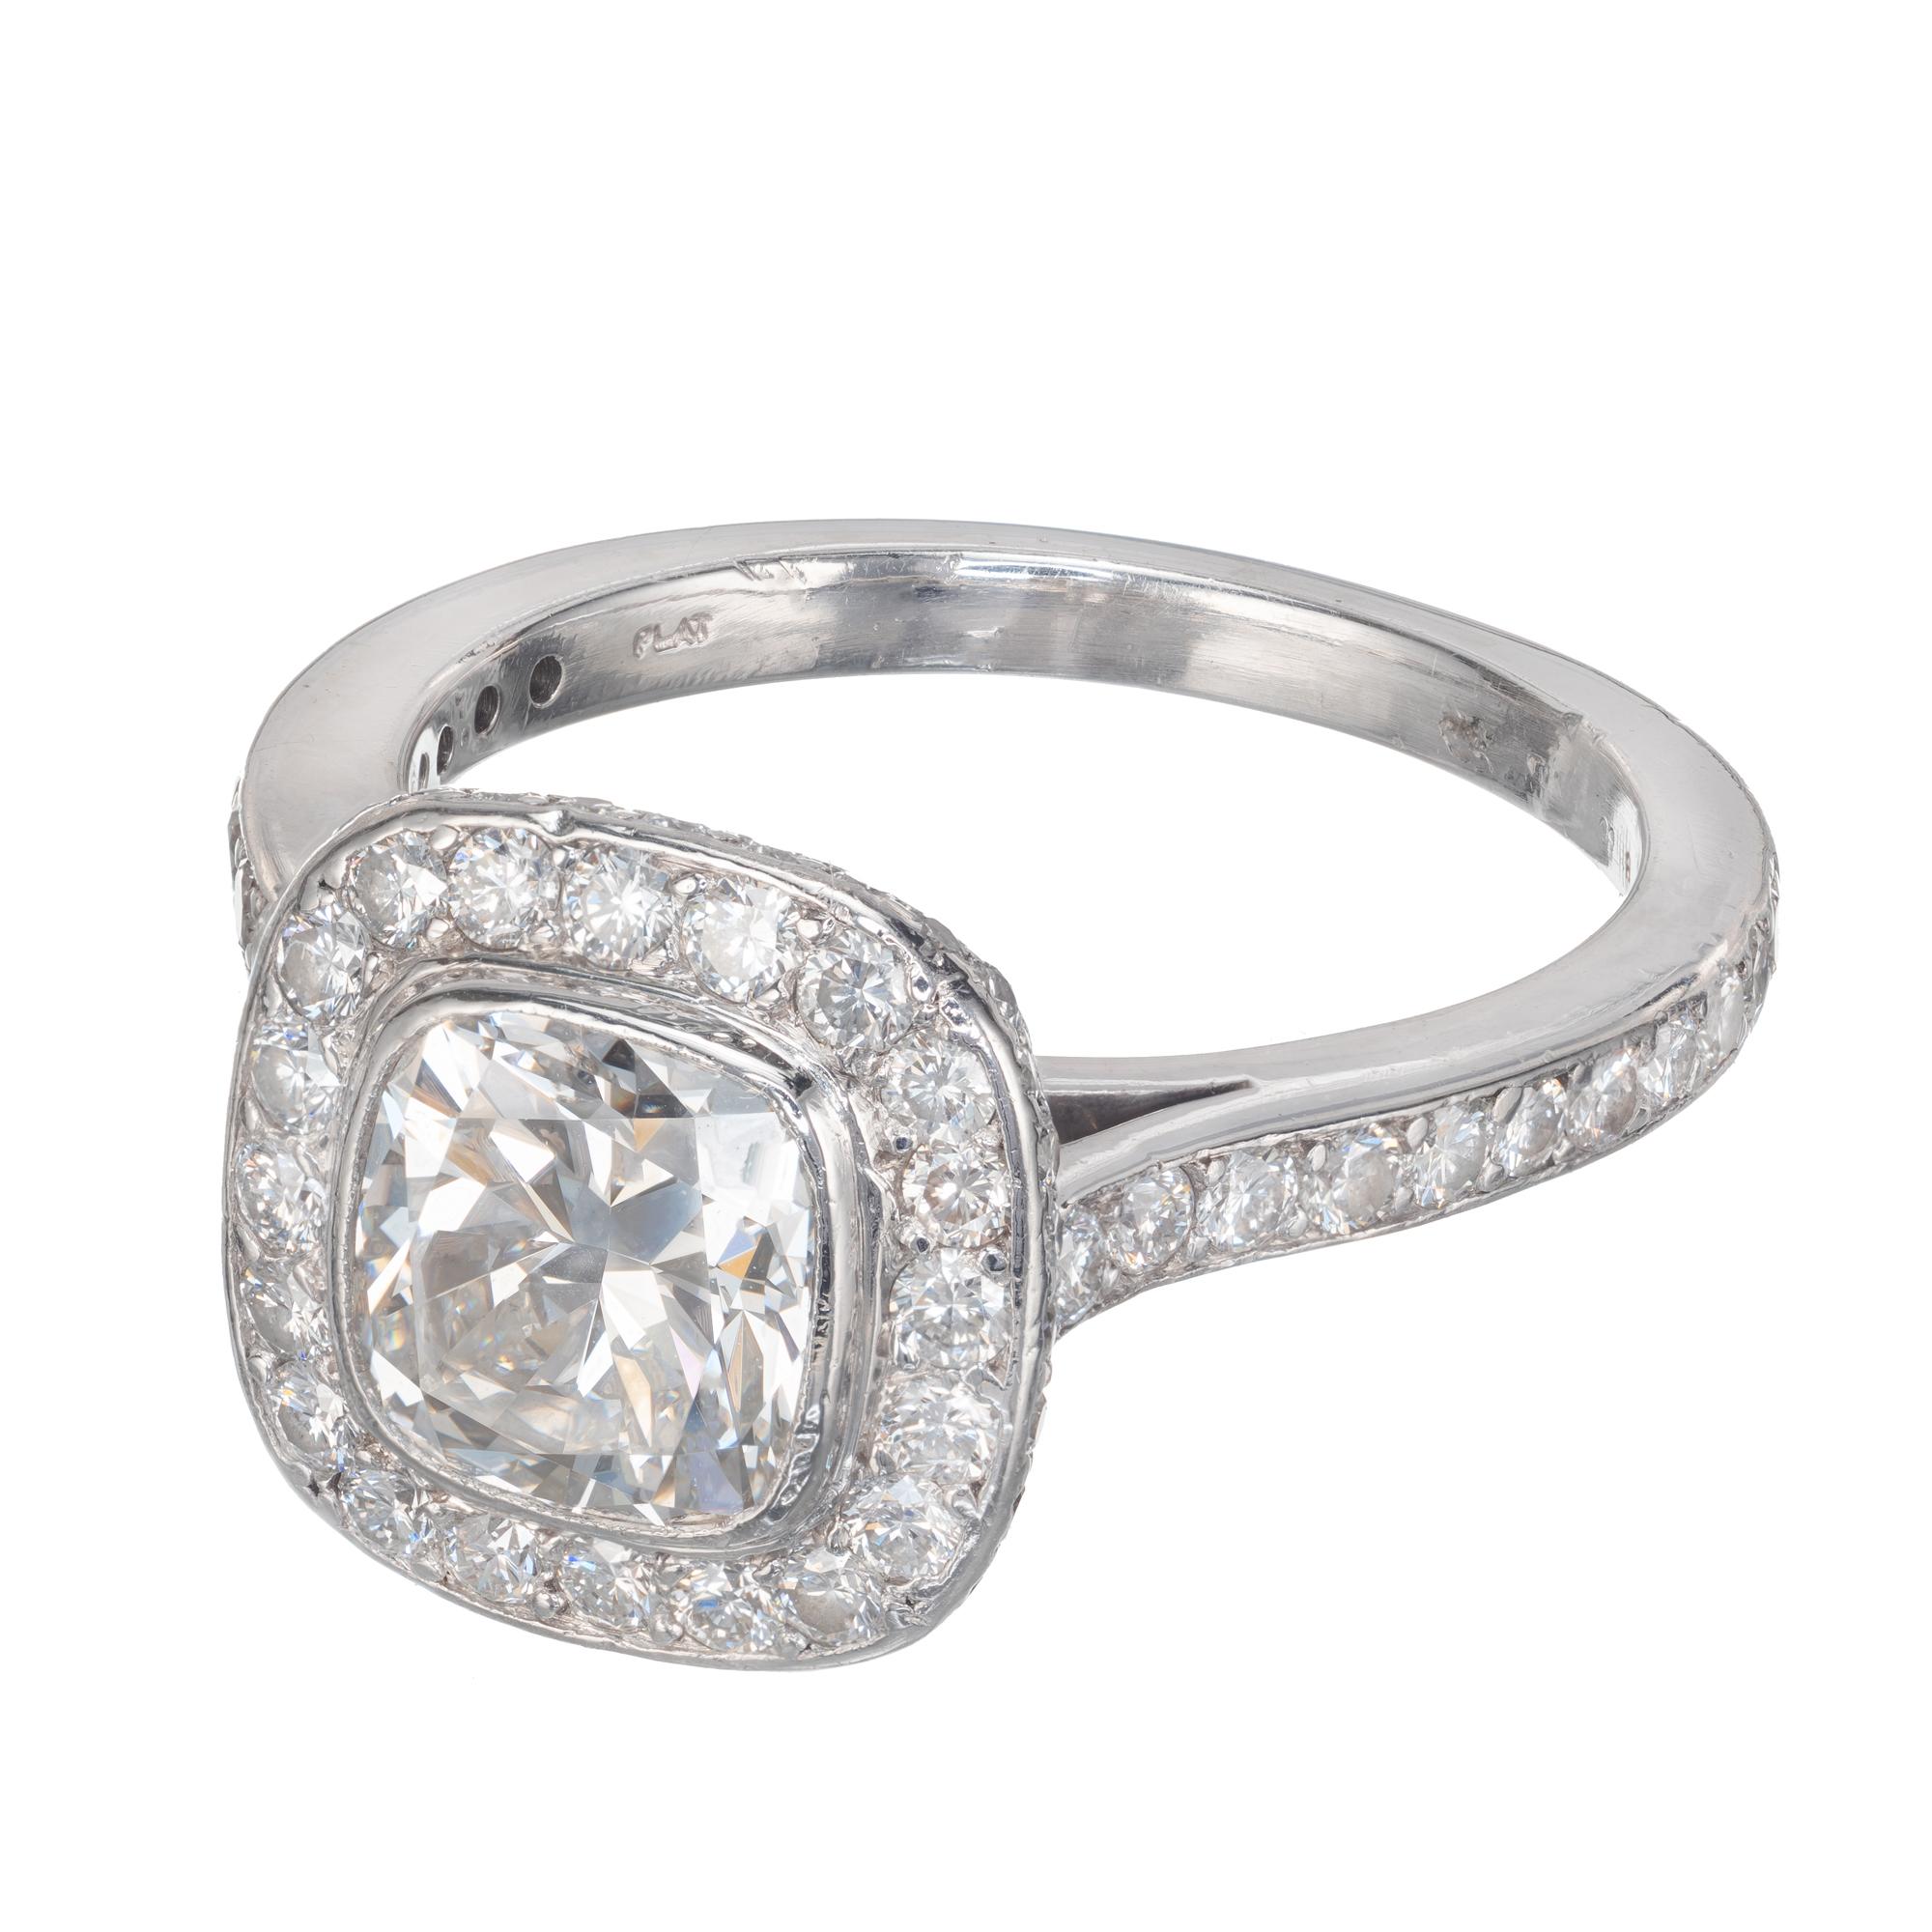 GIA Certified 1.51 Carat Diamond Halo Platinum Engagement Ring In Excellent Condition For Sale In Stamford, CT